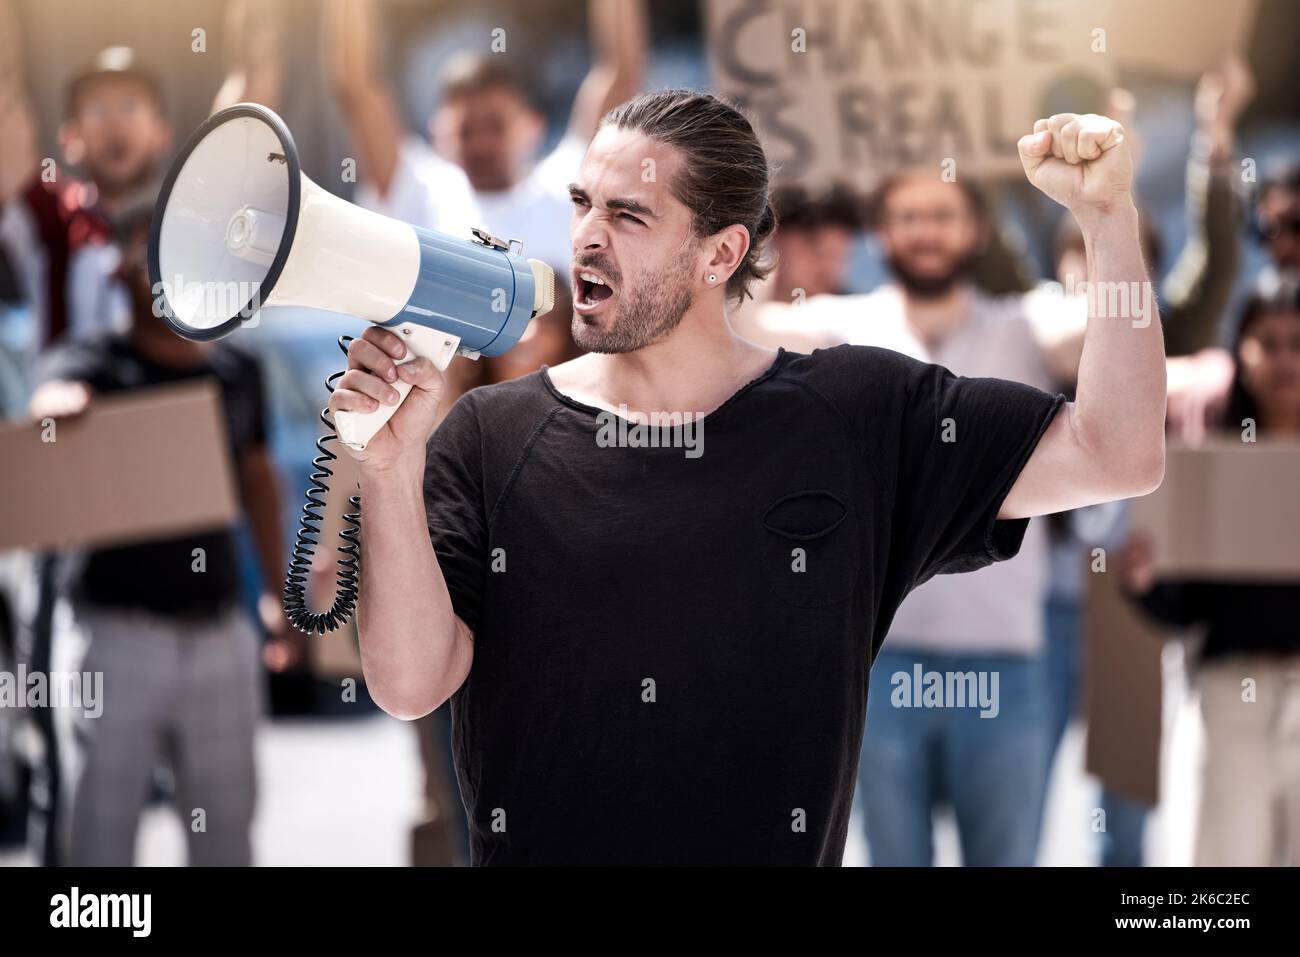 We wont back down. a young man yelling through a megaphone during a protest. Stock Photo